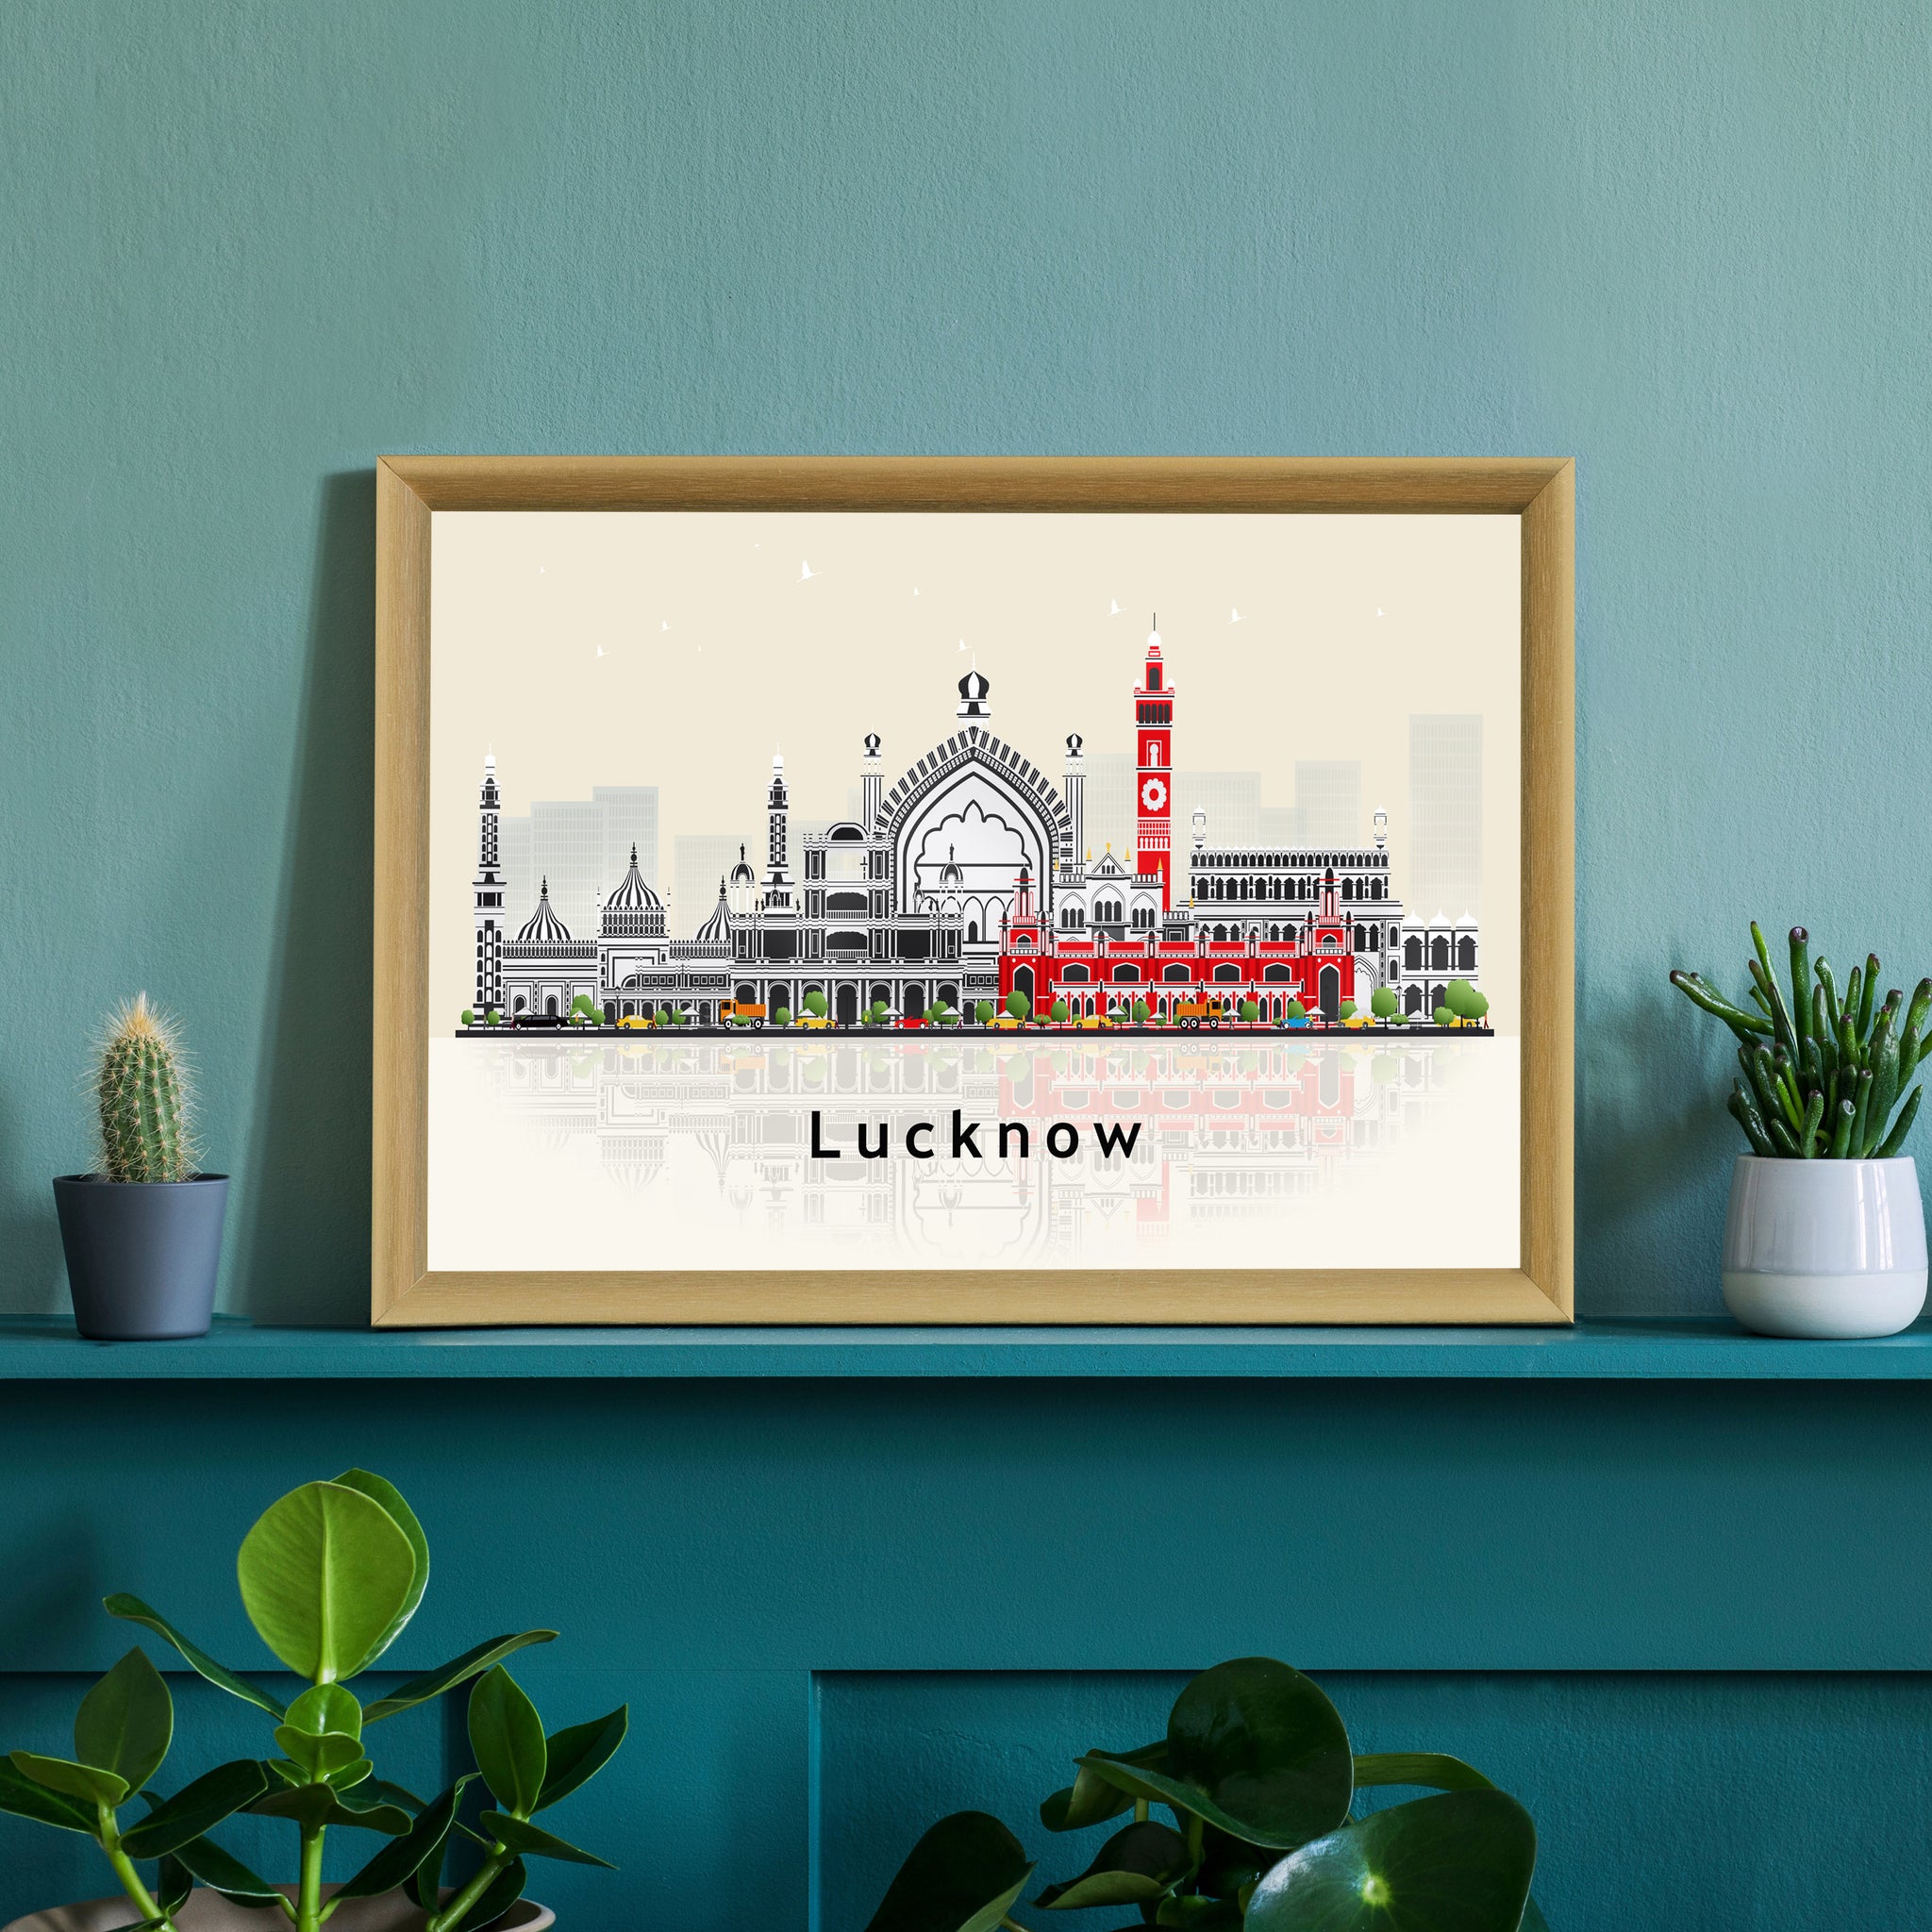 LUCKNOW INDIA Illustration skyline poster, Modern skyline cityscape poster, India city skyline landmark map poster, Home wall decoration